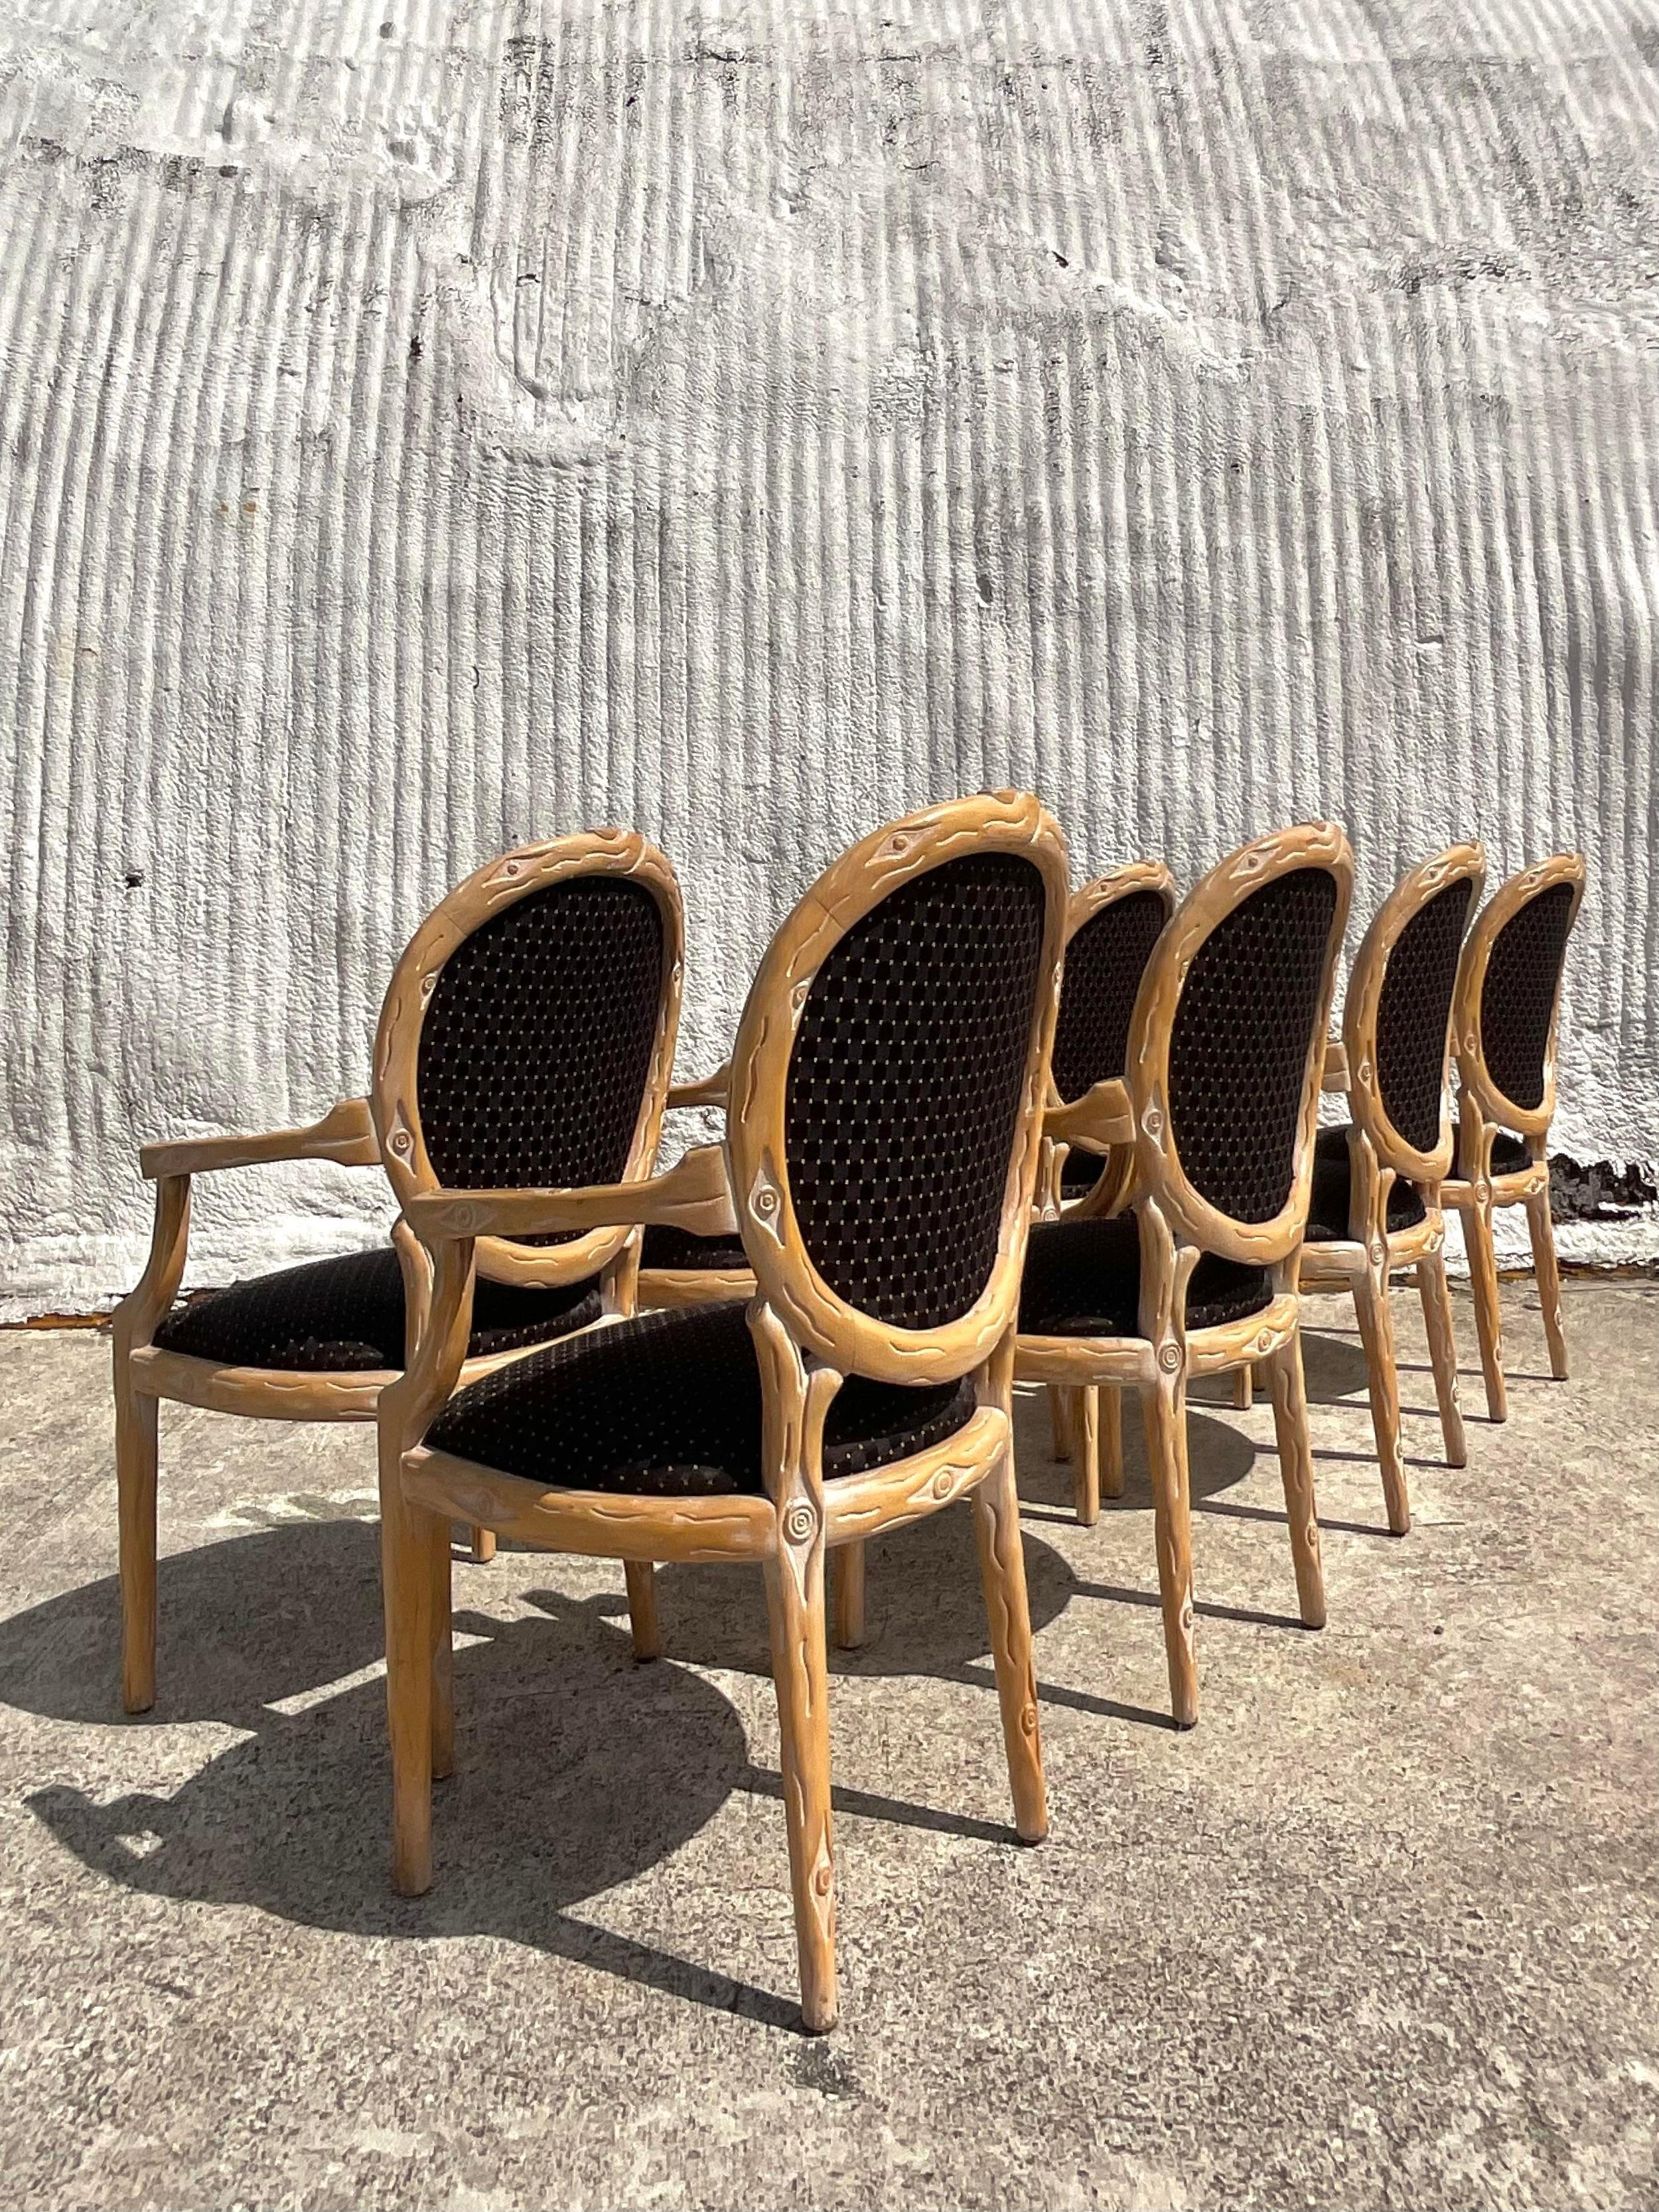 20th Century Vintage Boho Faux Bois Dining Chairs - Set of 8 For Sale